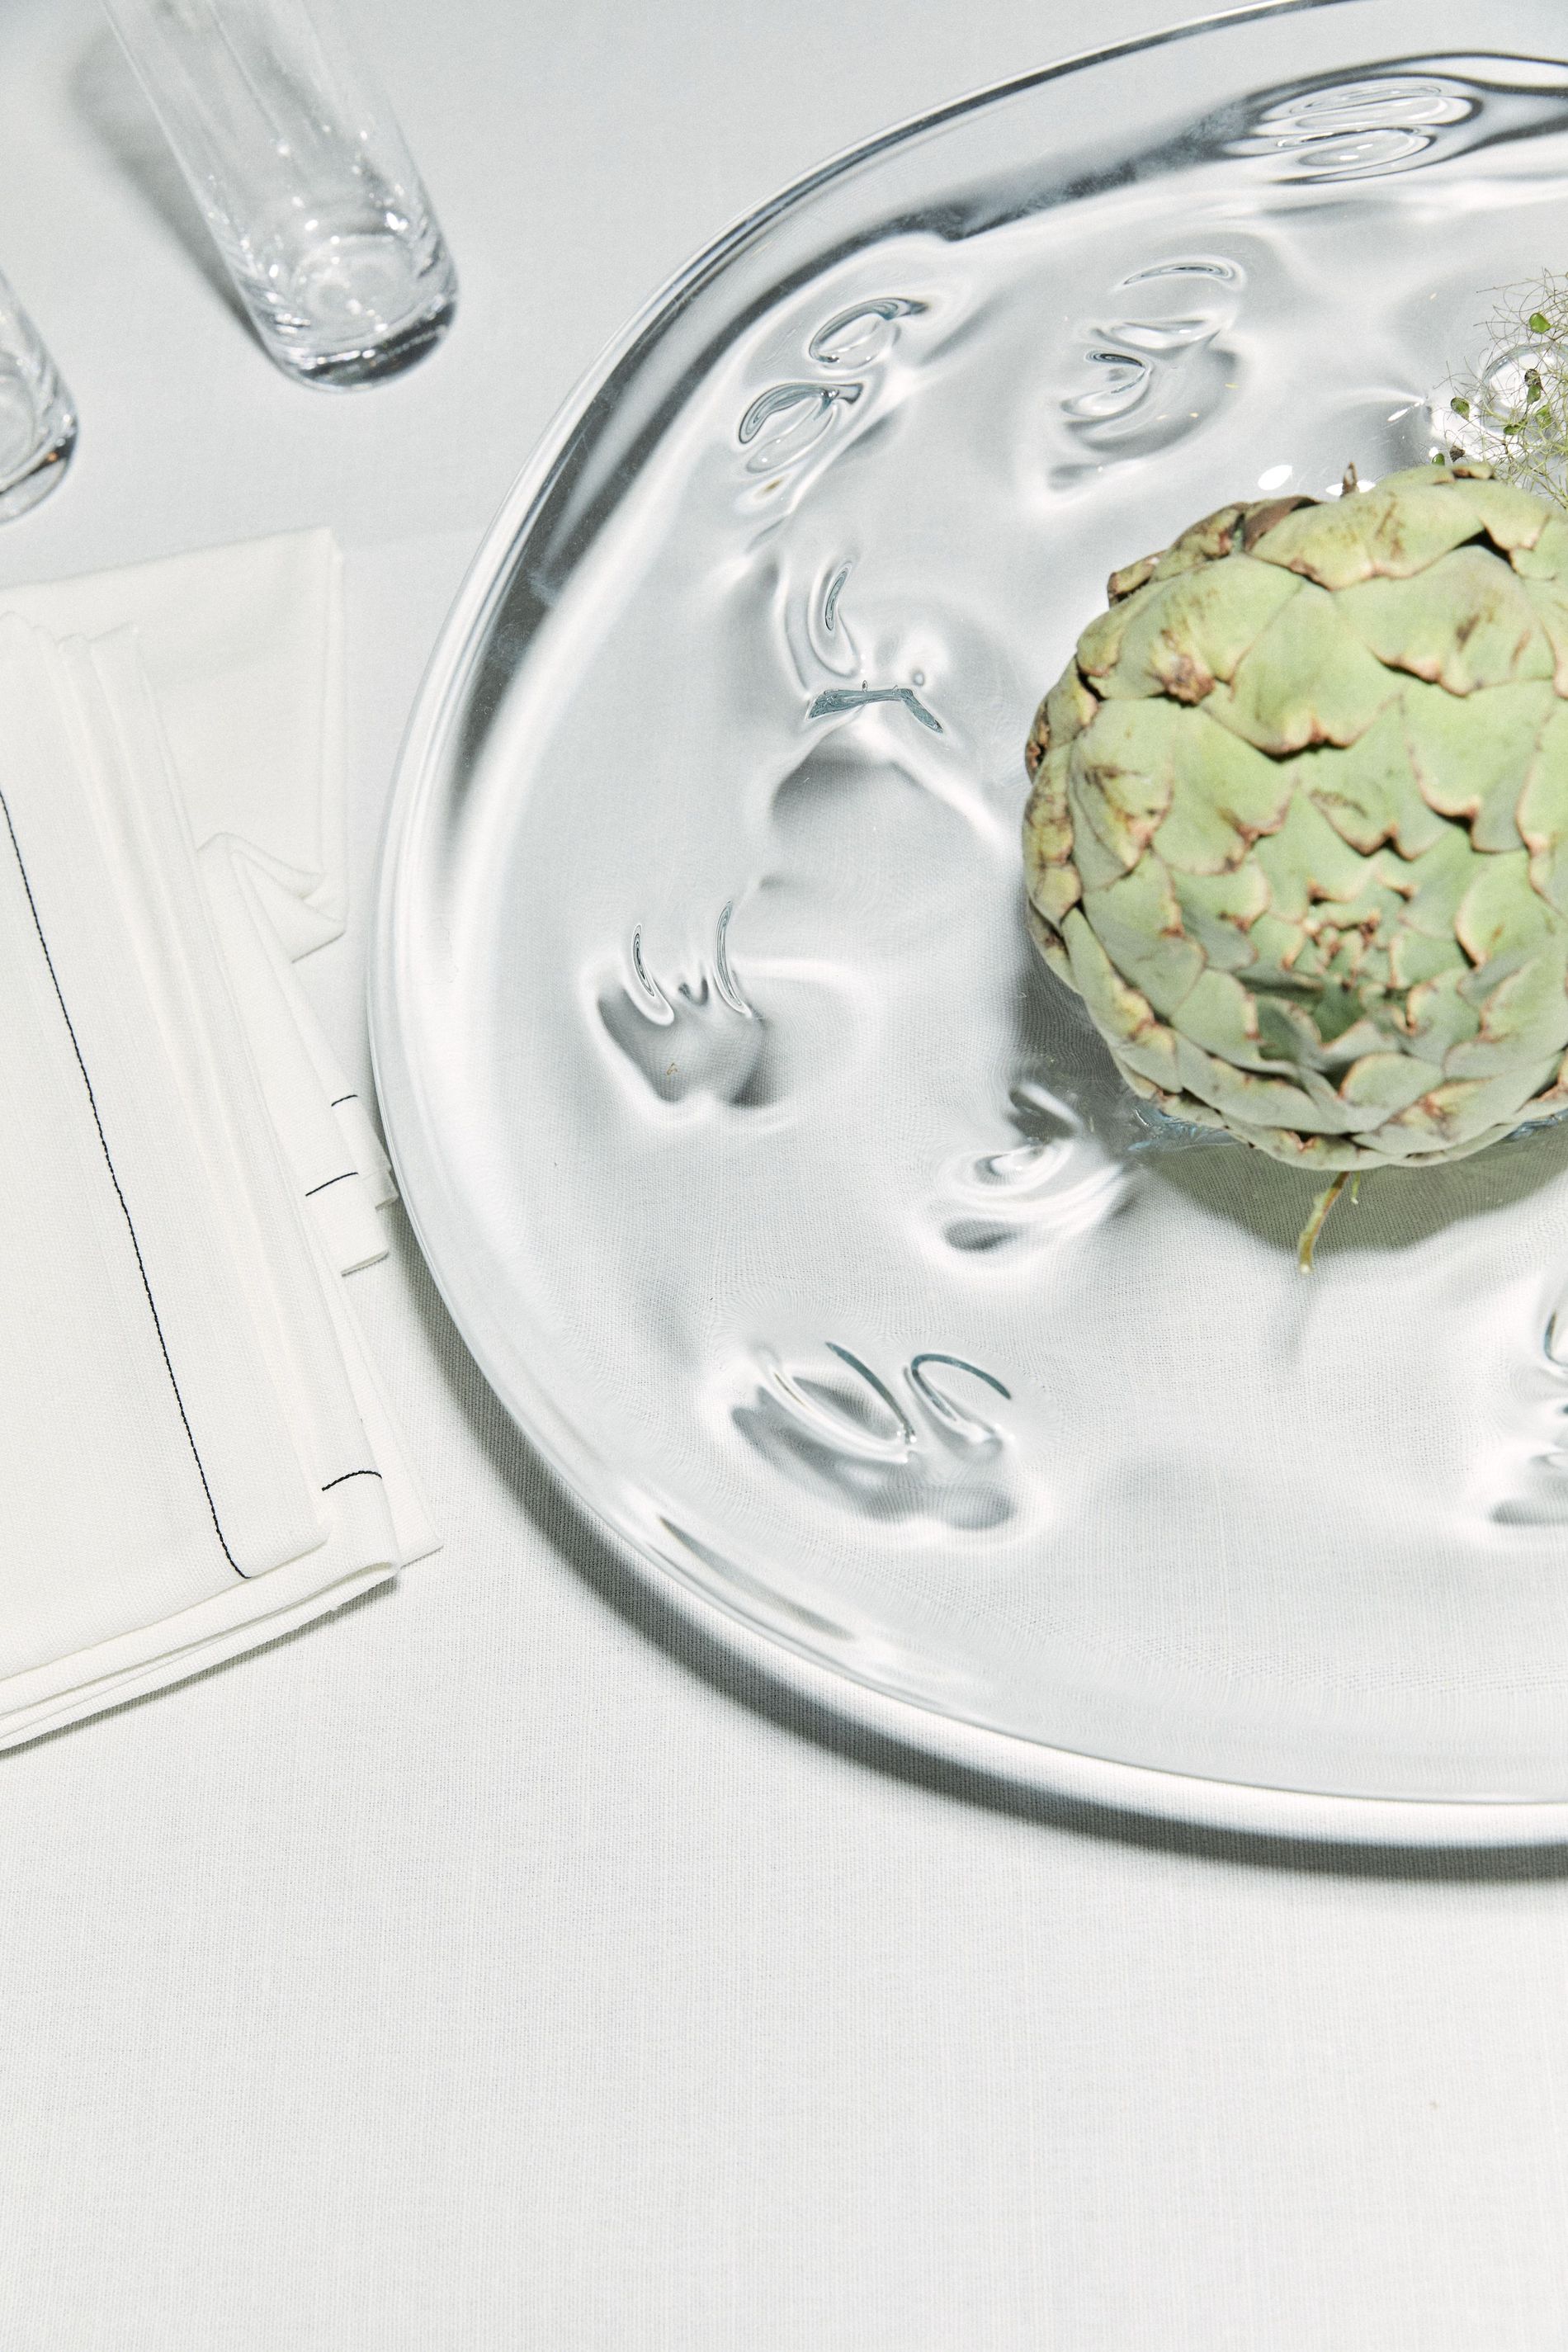 Table scape of Sophia Roe's interior collaboration, highlighting the glassware plate